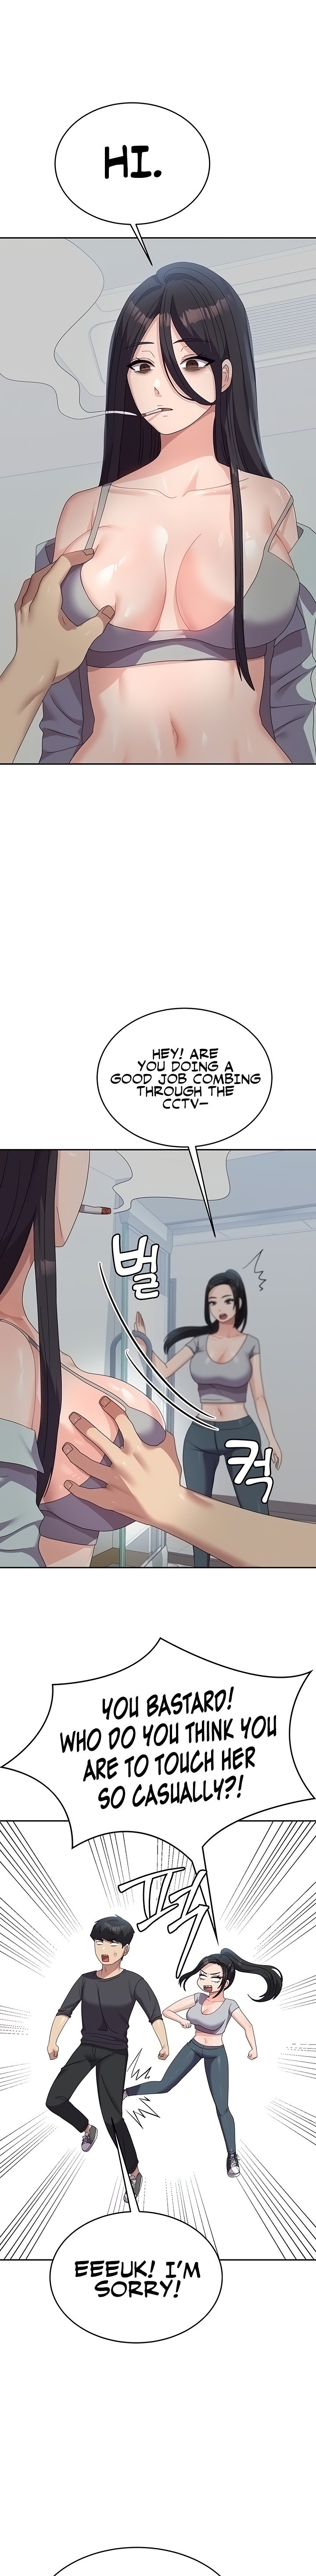 Women’s University Student who Served in the Military - Chapter 34 Page 11